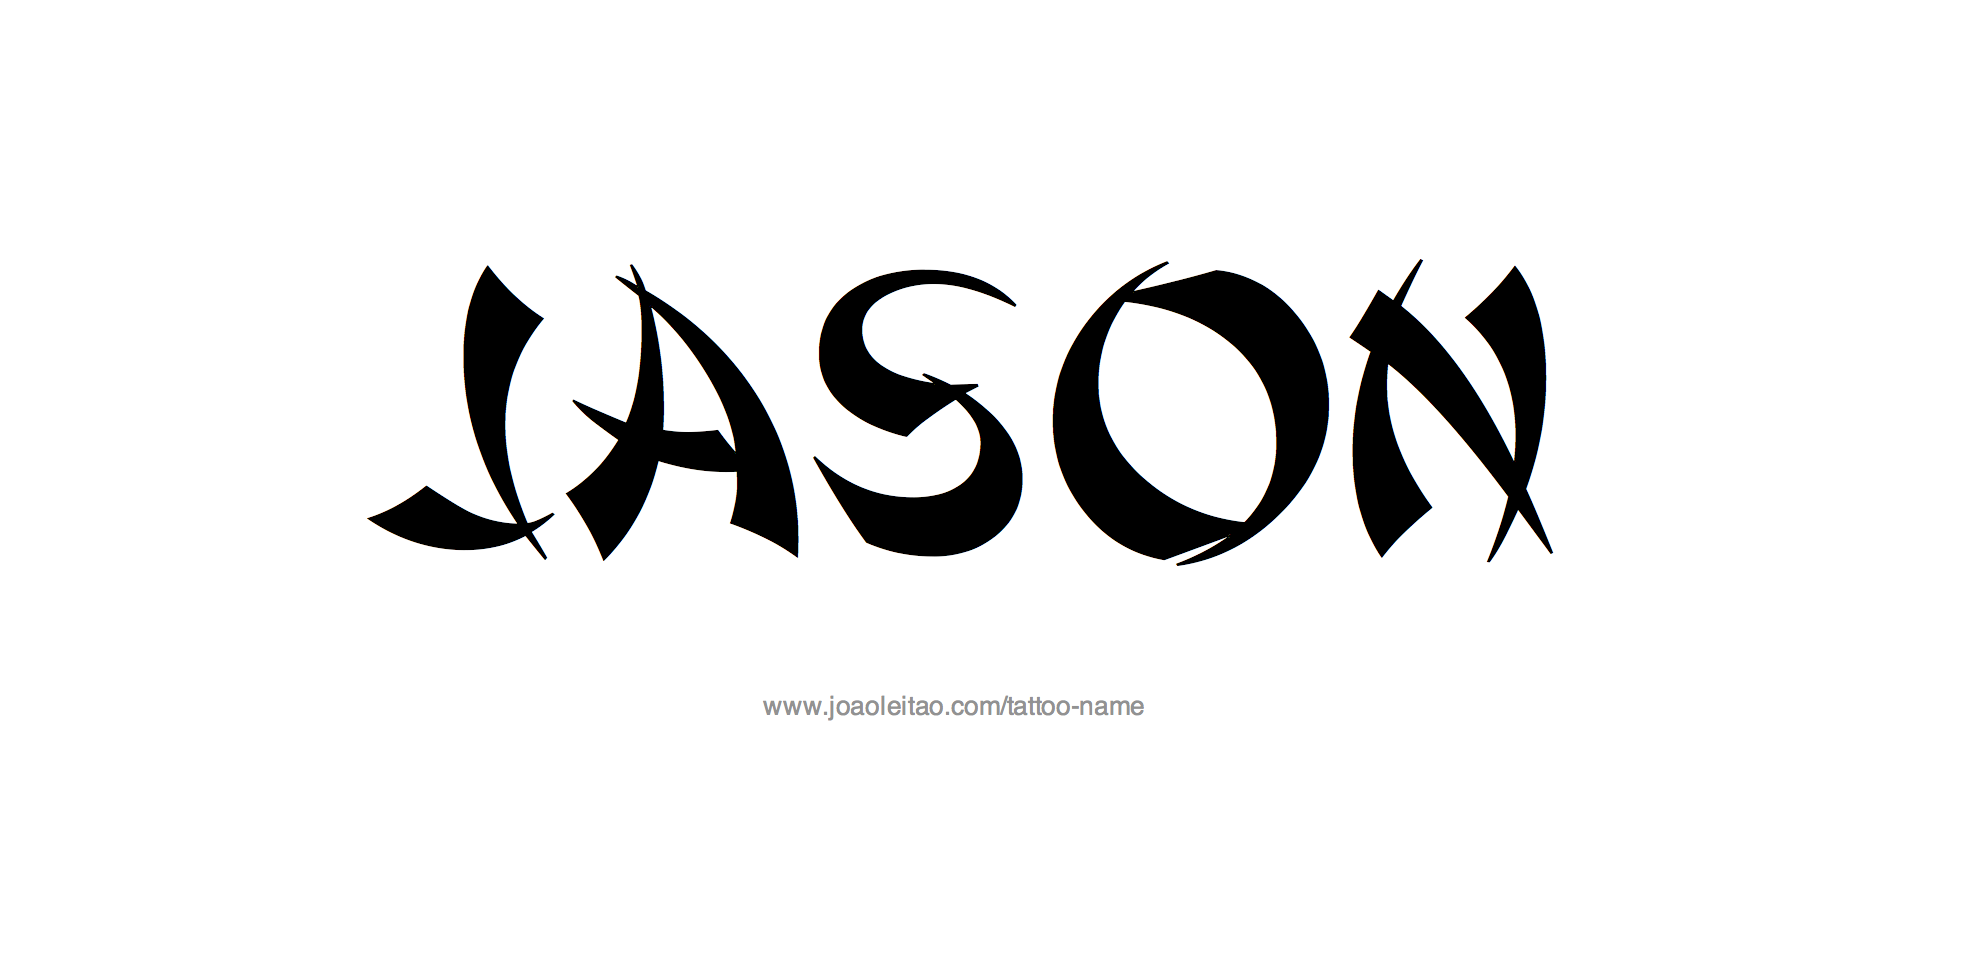 Jason The Name - ClipArt Best